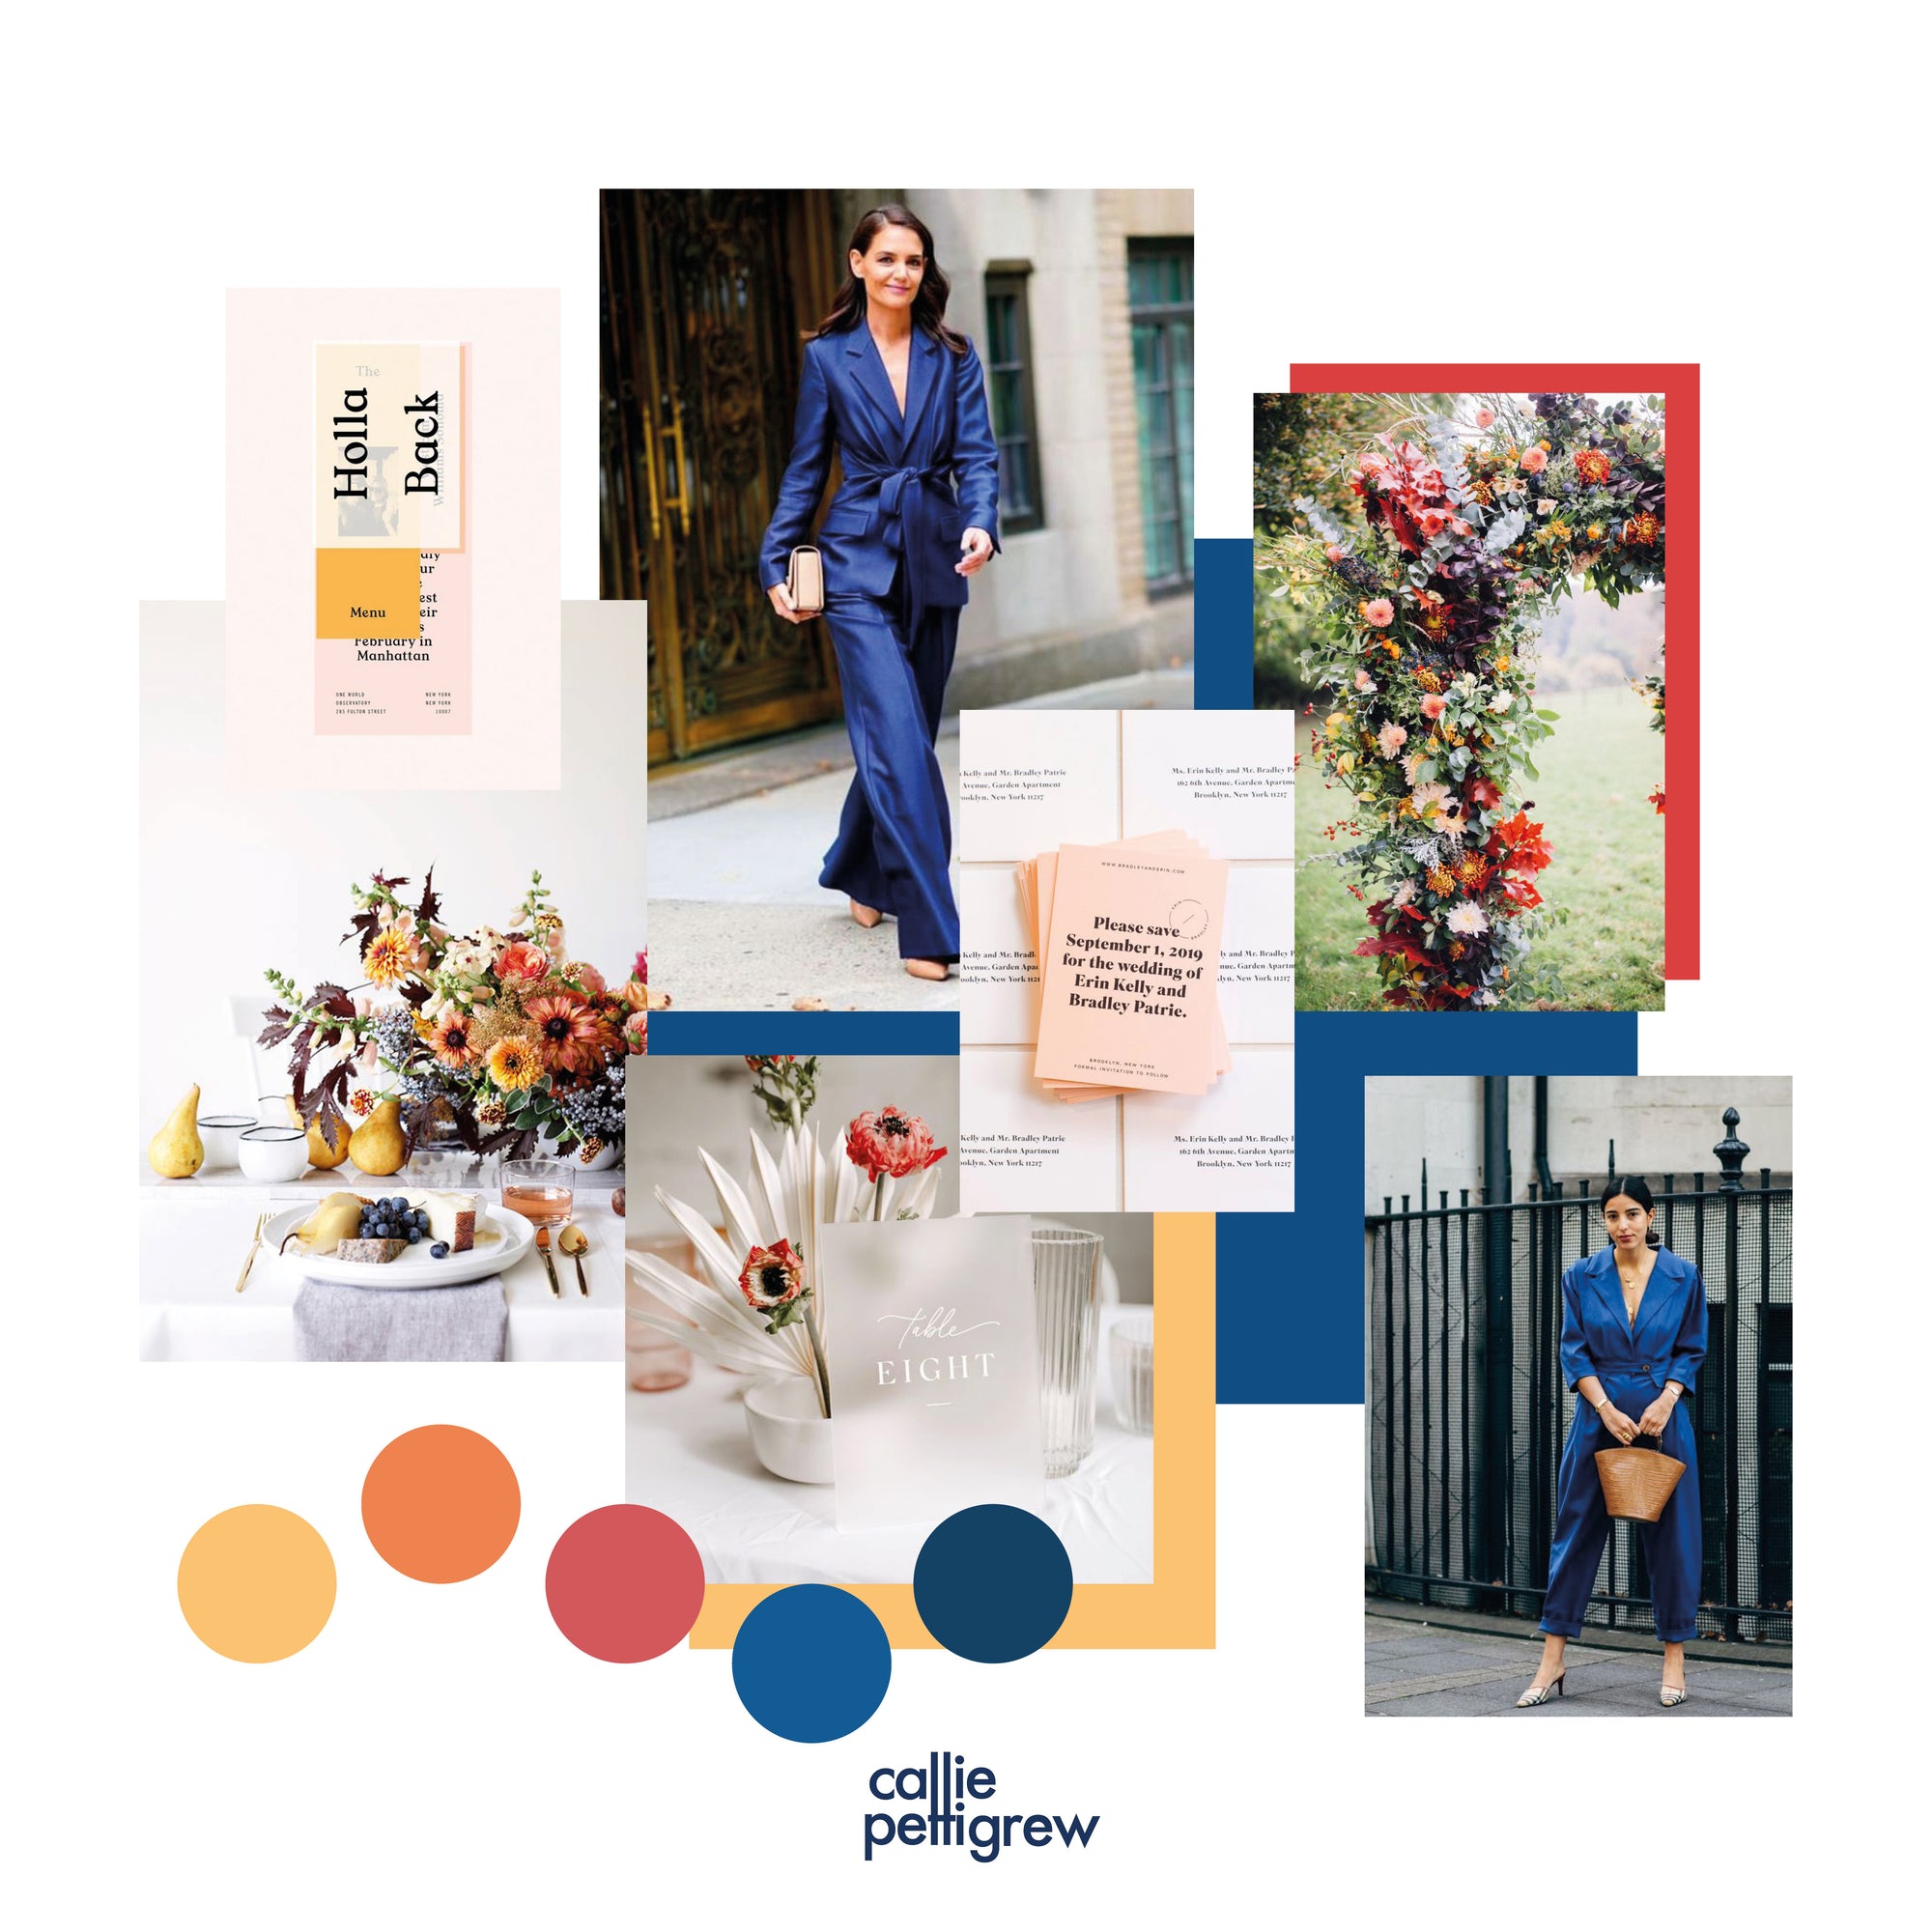 #MoodboardMonday - Pantone colour of the year 2020 - Classic Blue